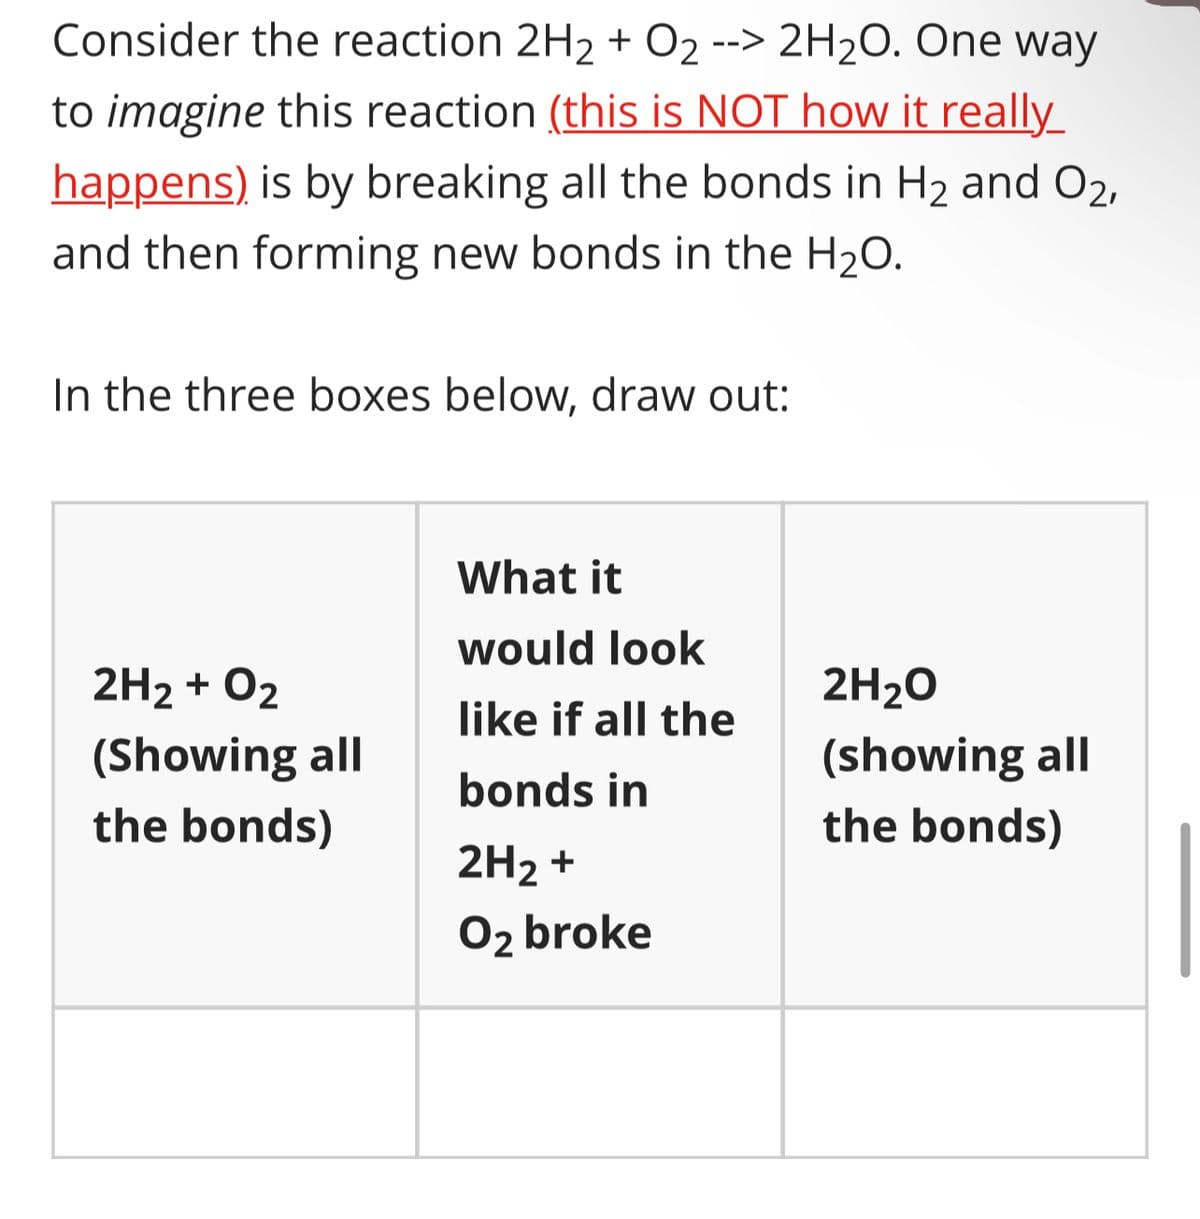 Consider the reaction 2H₂ + O₂ --> 2H₂O. One way
to imagine this reaction (this is NOT how it really
happens) is by breaking all the bonds in H₂ and O2,
and then forming new bonds in the H₂O.
In the three boxes below, draw out:
2H₂ + O2
(Showing all
the bonds)
What it
would look
like if all the
bonds in
2H₂ +
O2 broke
2H₂O
(showing all
the bonds)